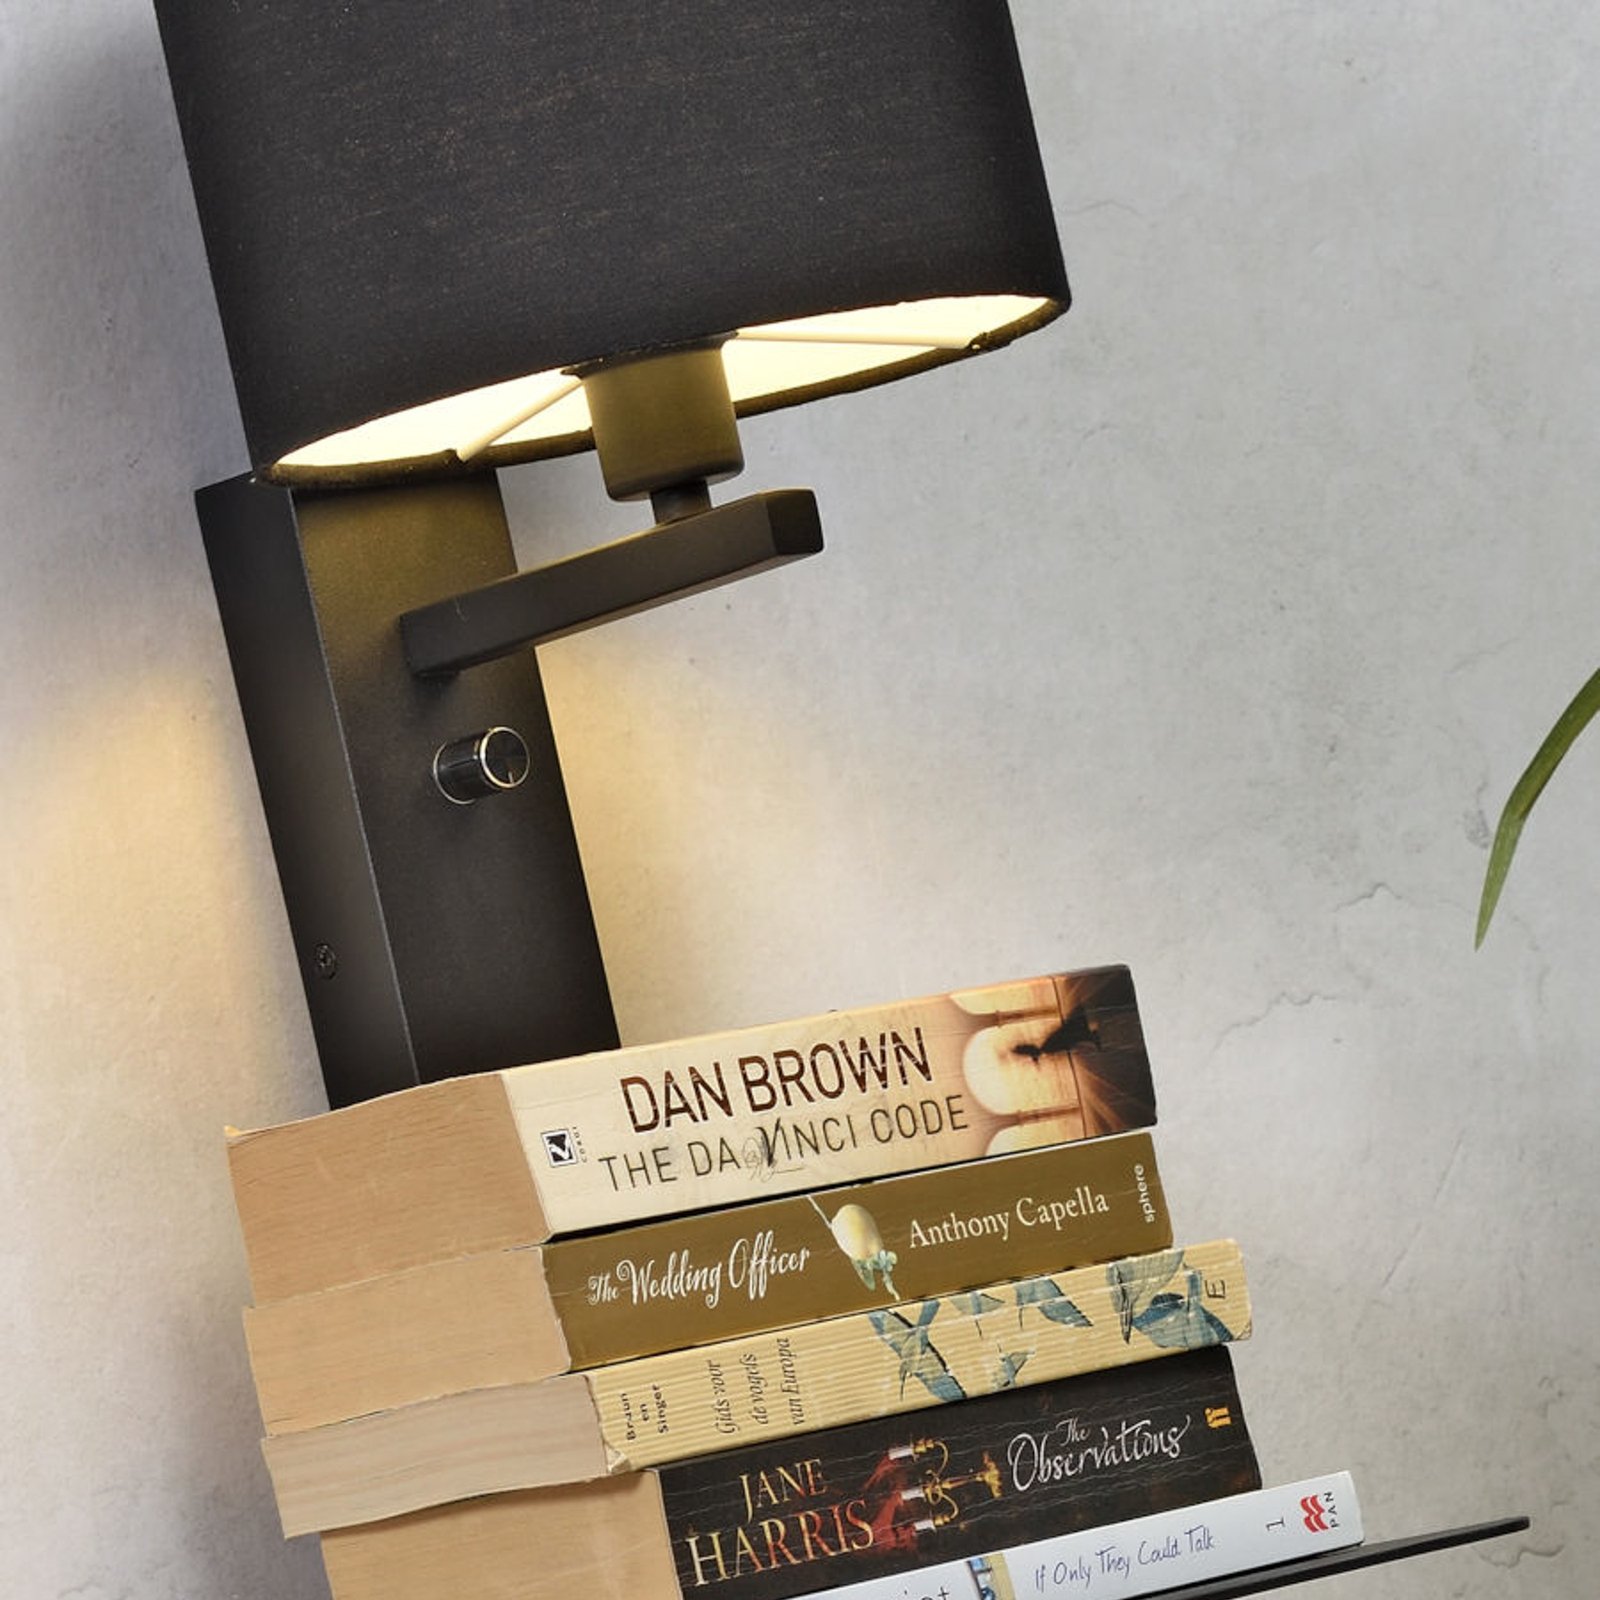 It's about RoMi Florence reading lamp 2-bulb linen bright